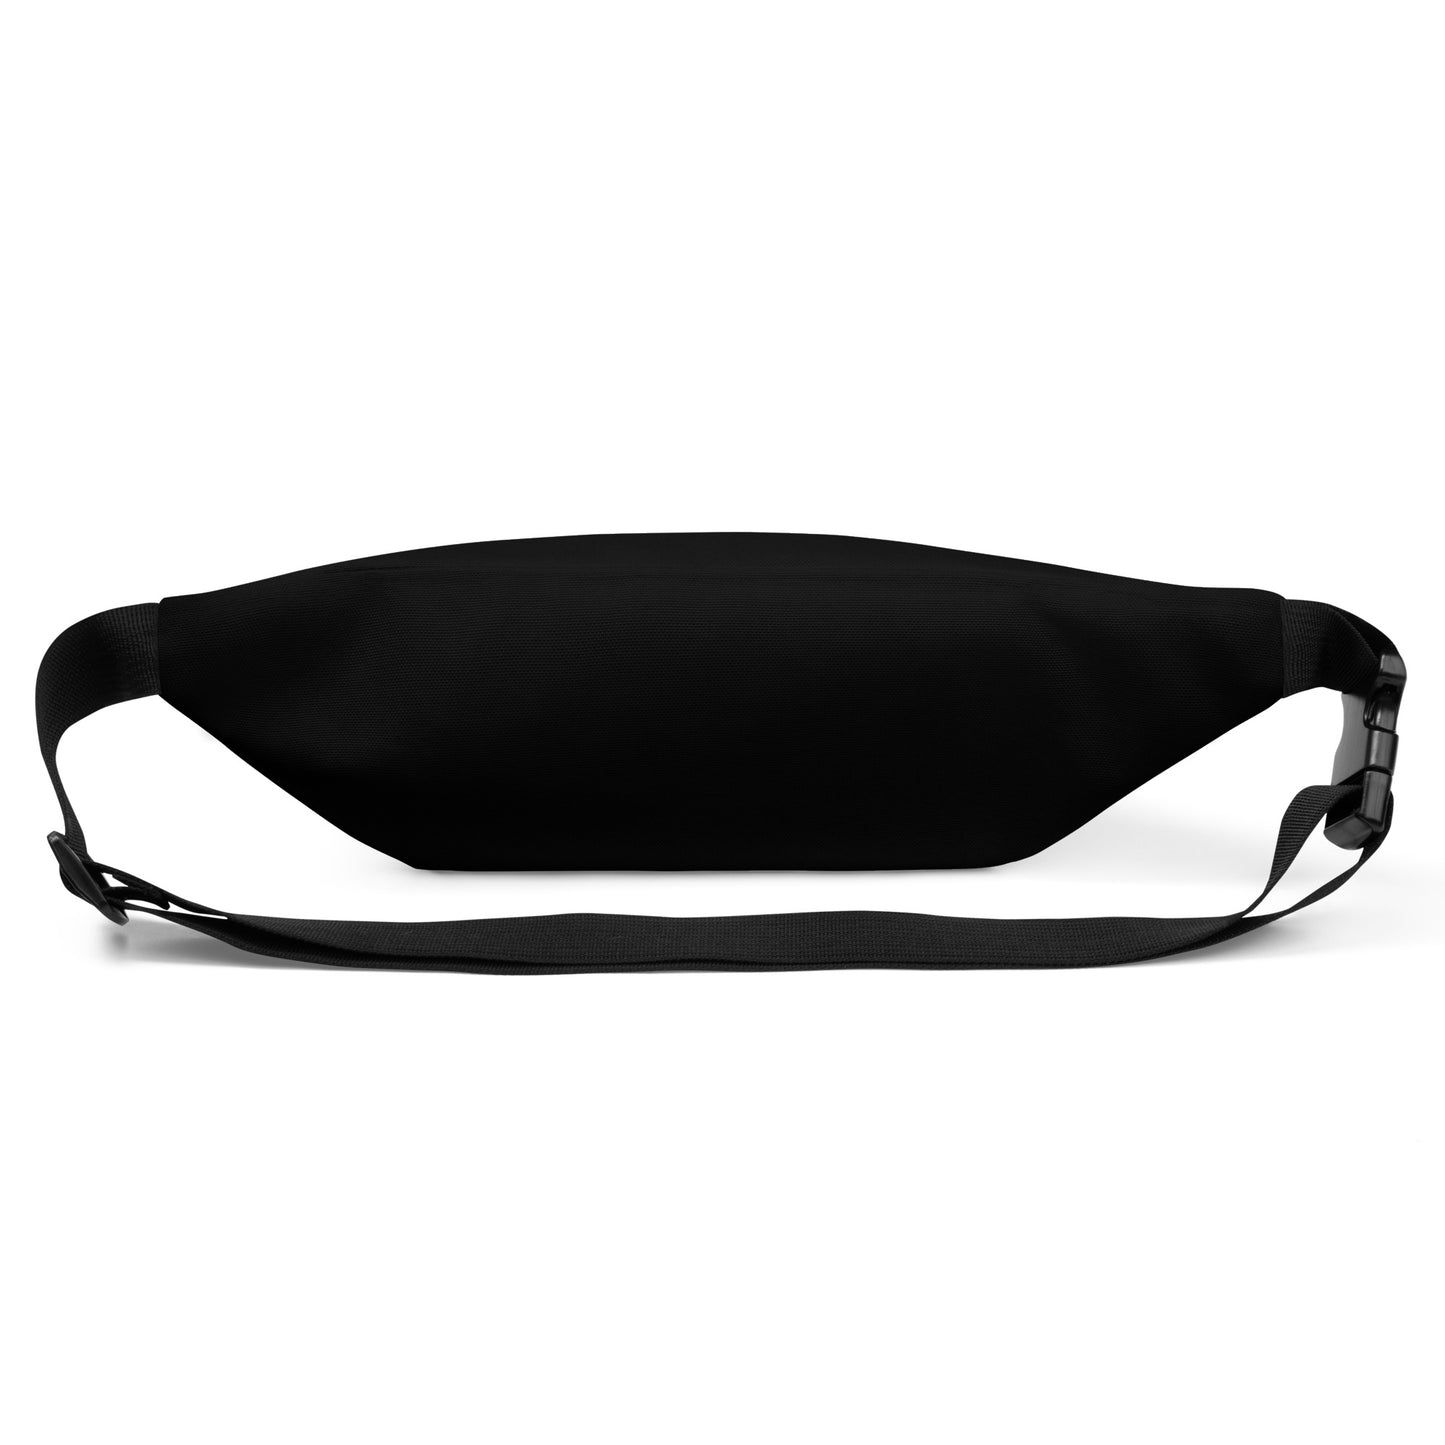 Live United Pride Fanny Pack